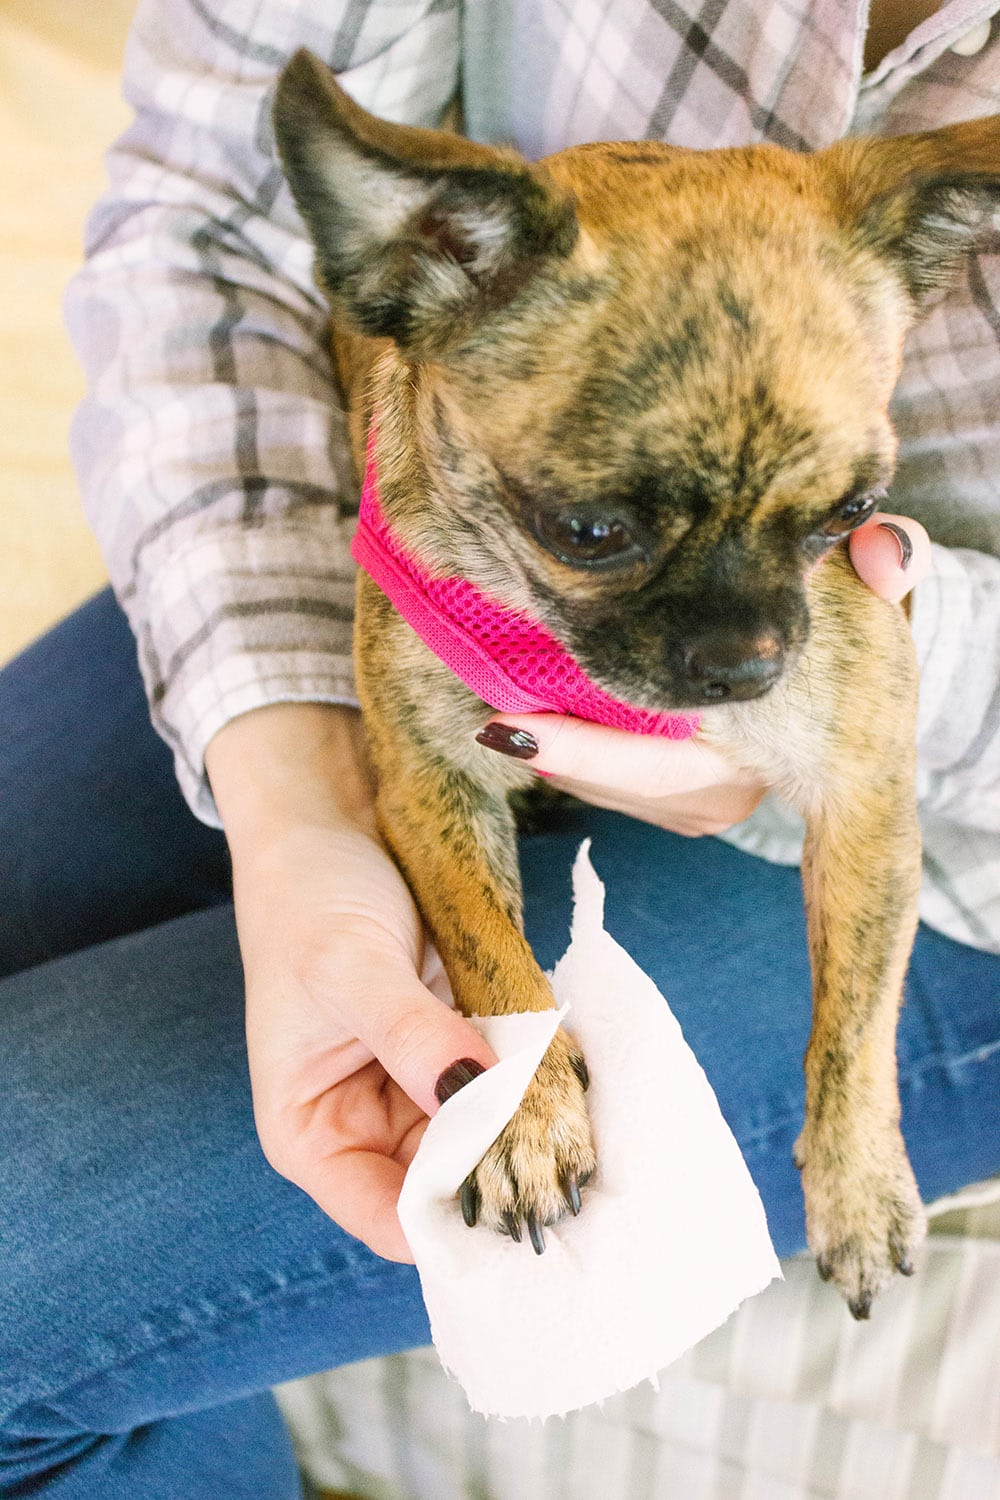 Chihuahua getting paw wiped with toilet paper.